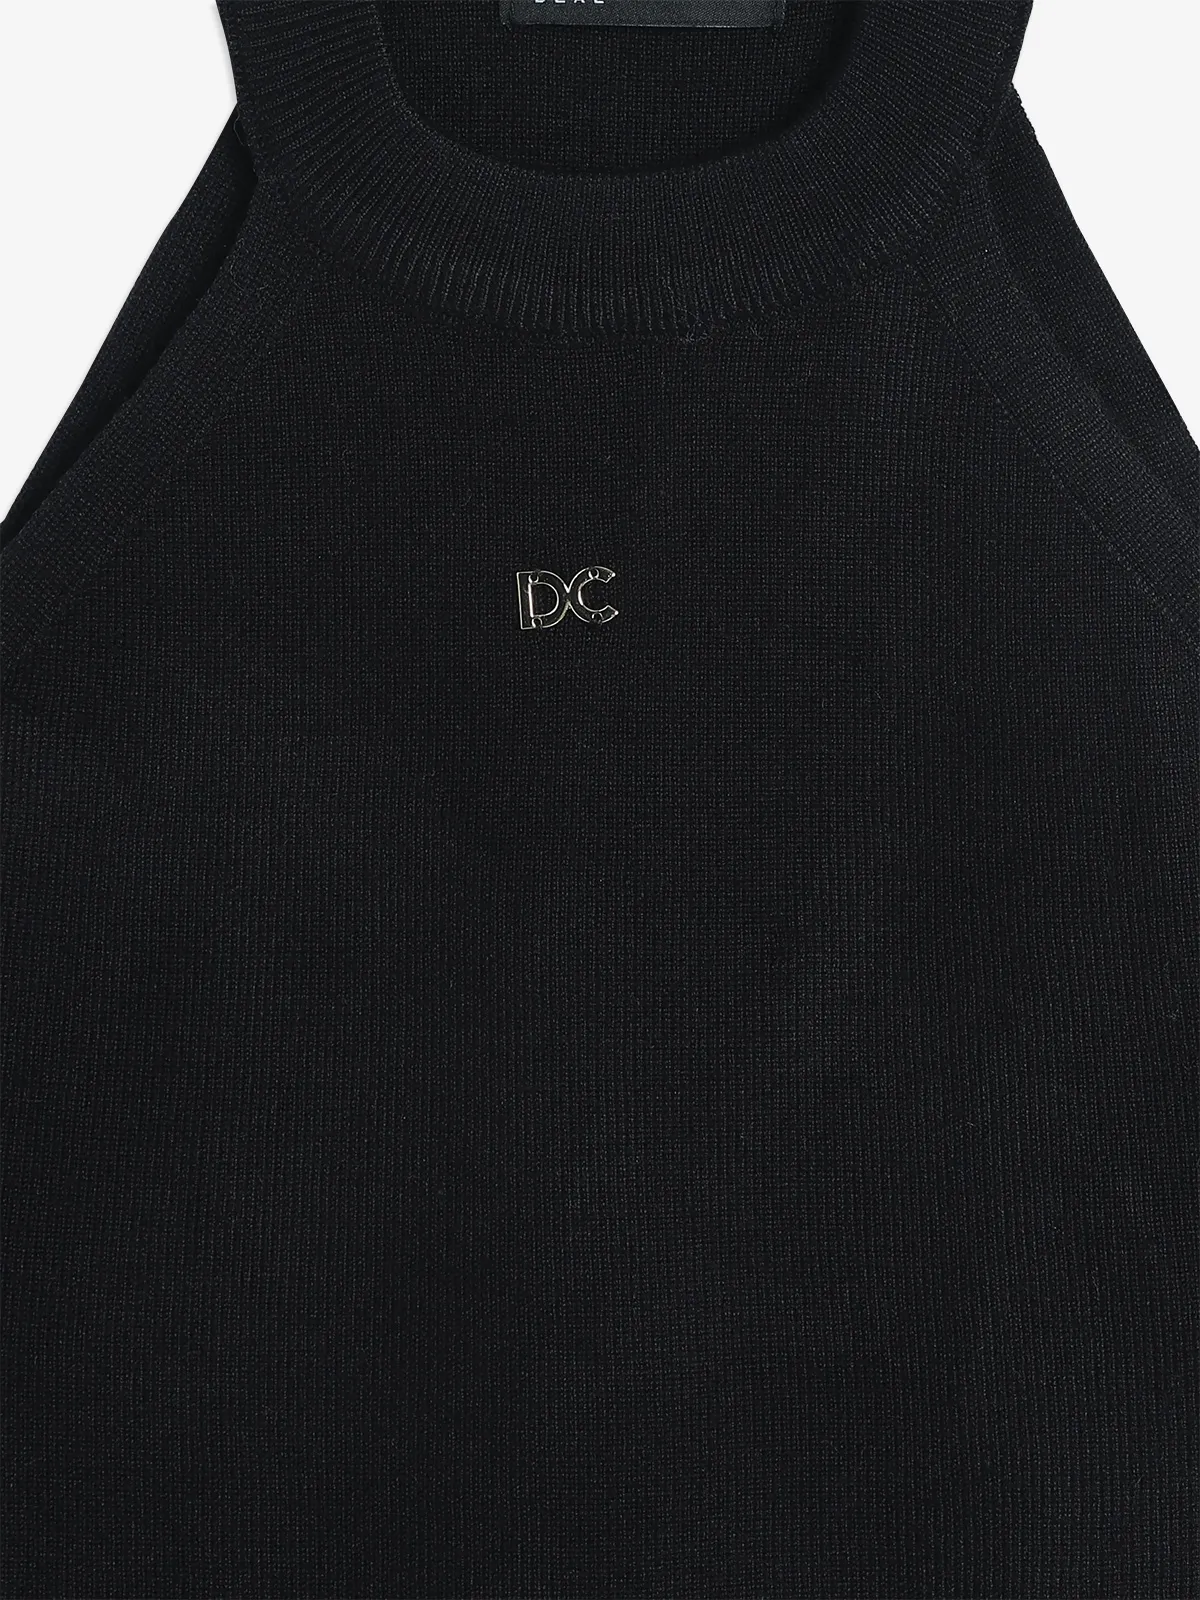 DEAL black knitted plain top